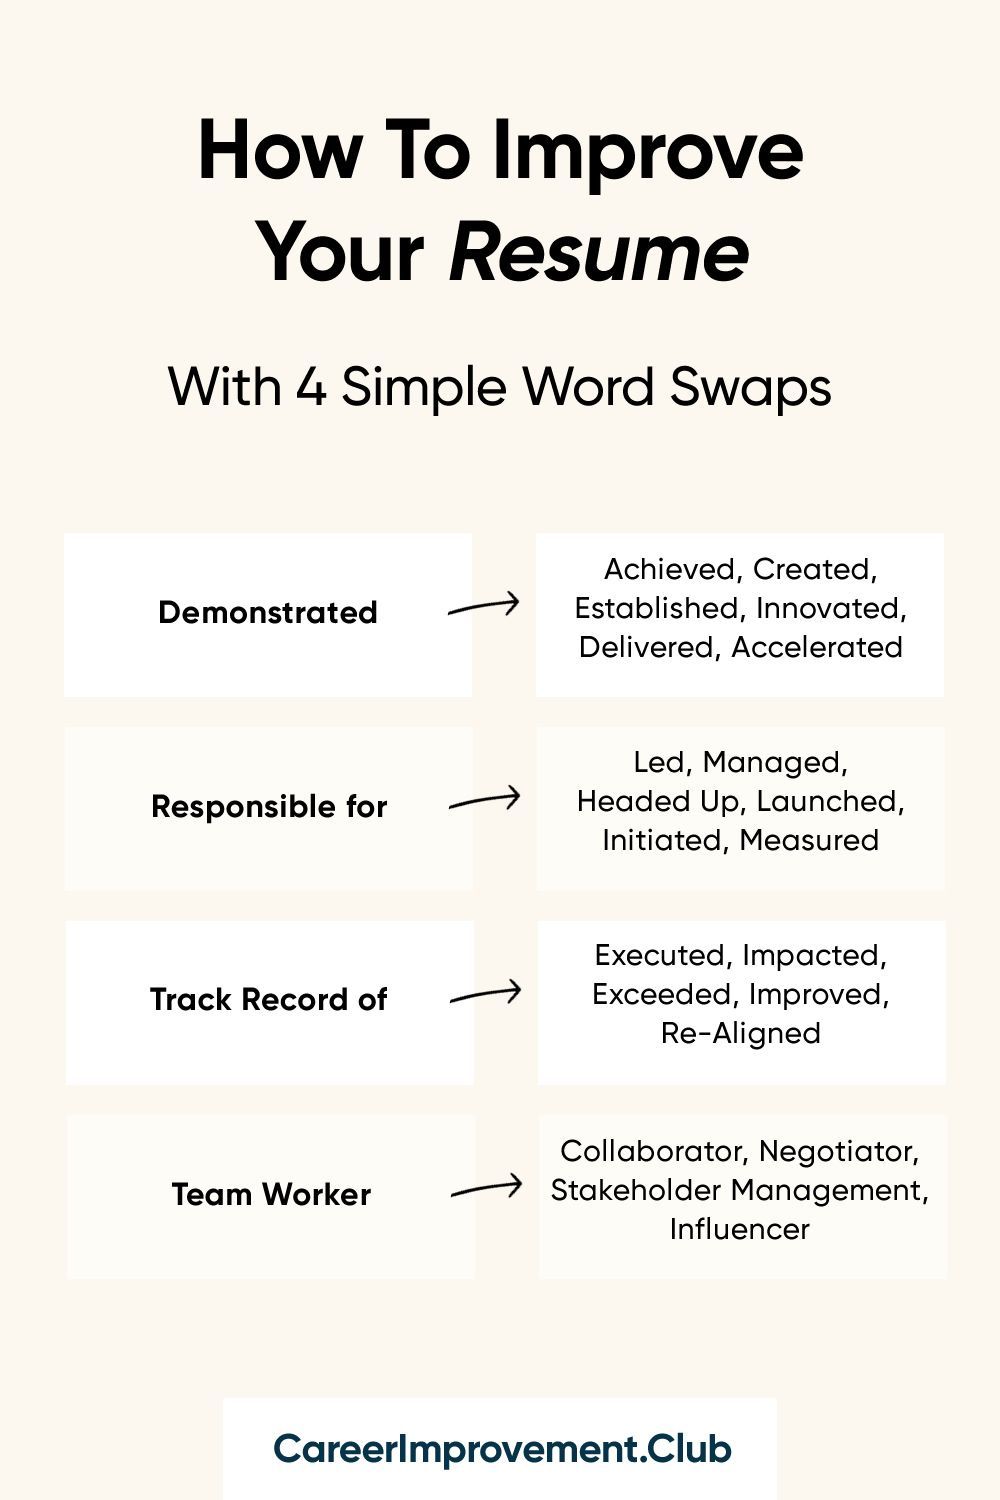 How To Improve Your Resume - 4 Simple Word Swaps